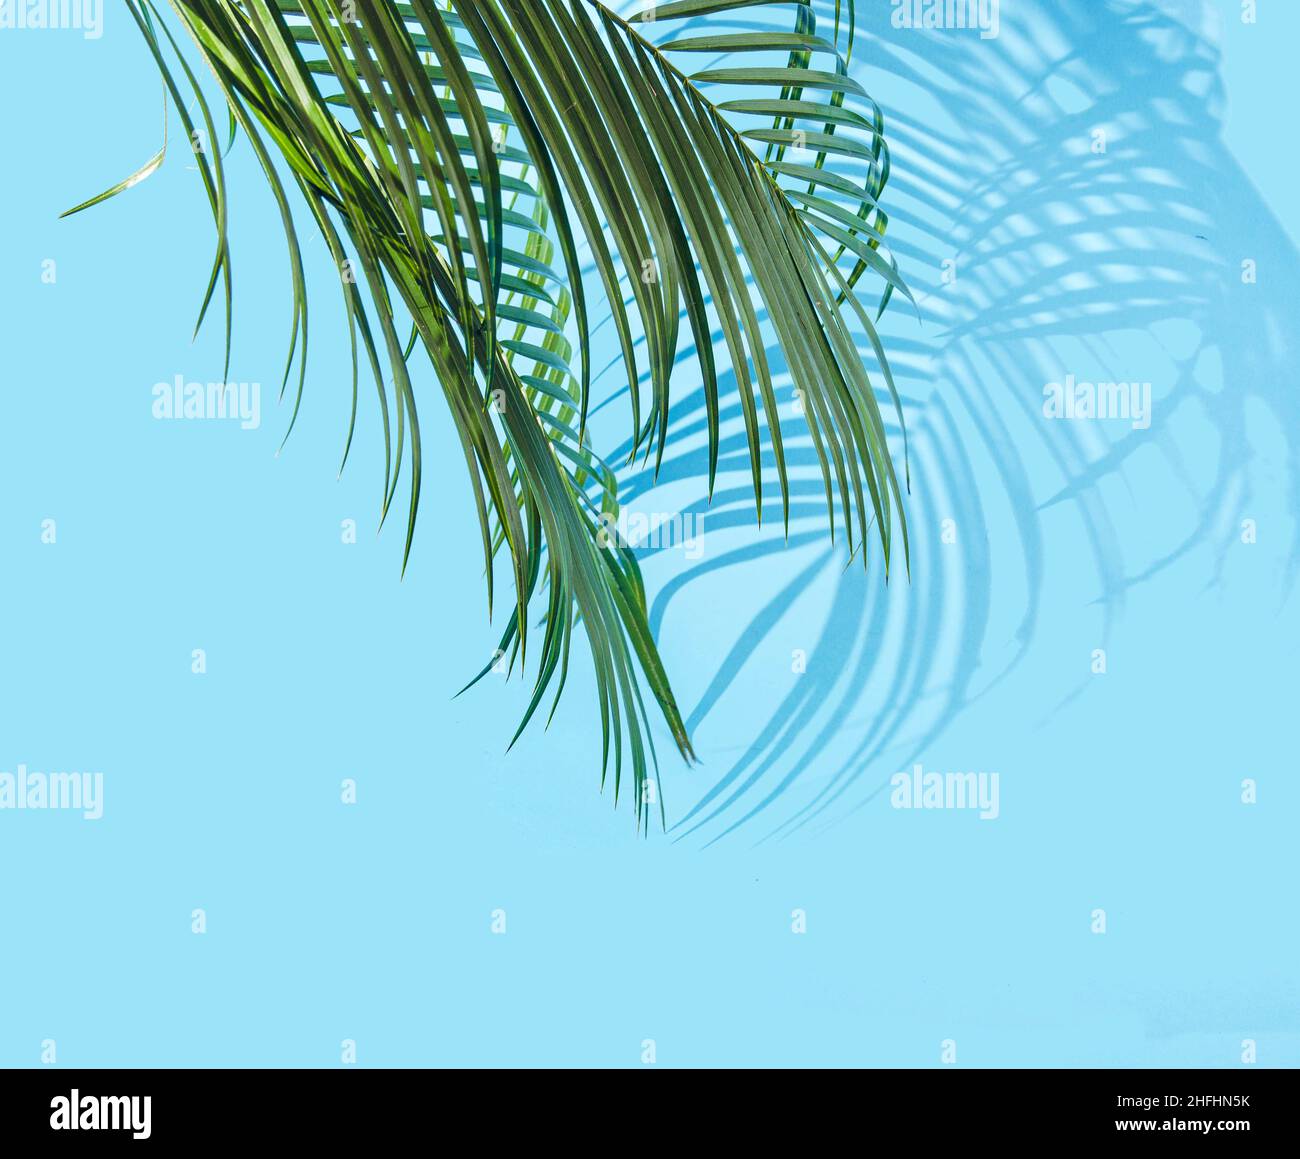 Palm leaves and shadows over a blue background. Creative concept for spring break holidays advertisement. Artistic design for travel agency web banner Stock Photo